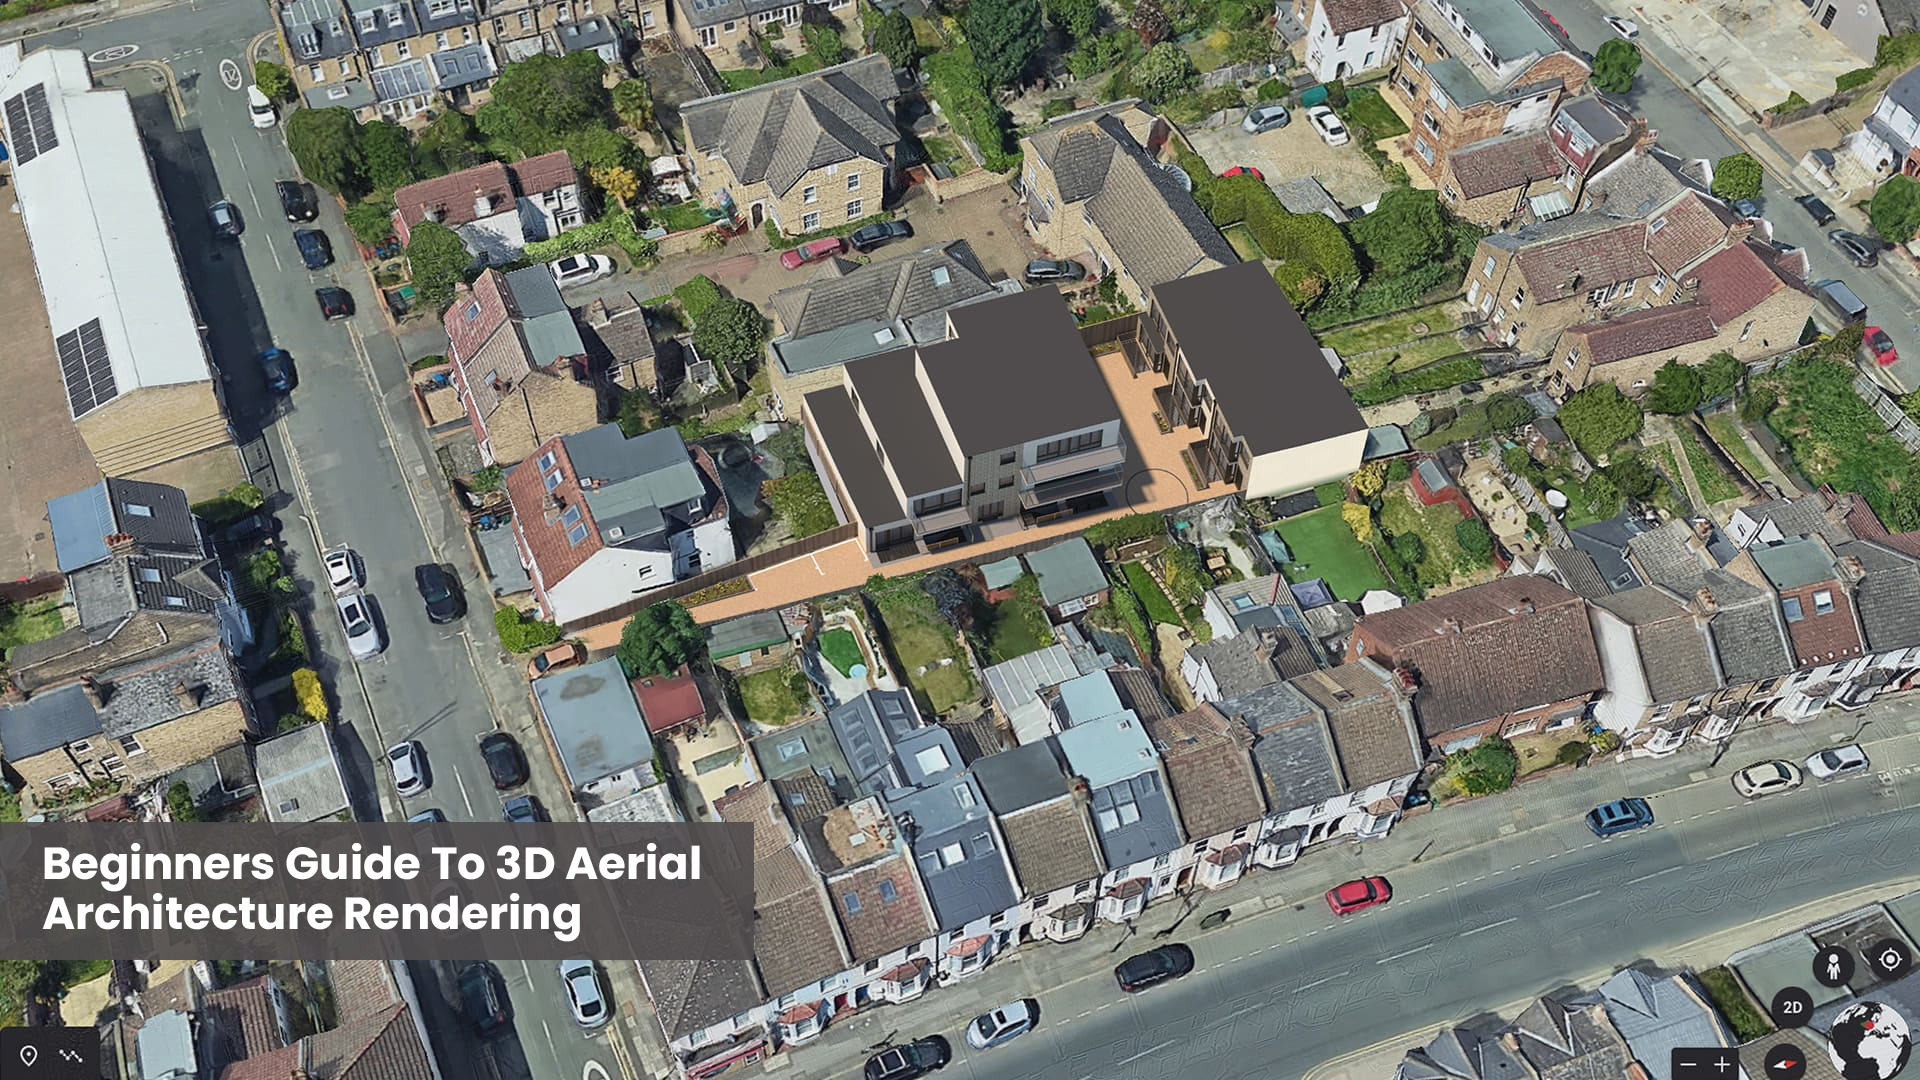 Beginners Guide to 3D Aerial Architecture Rendering